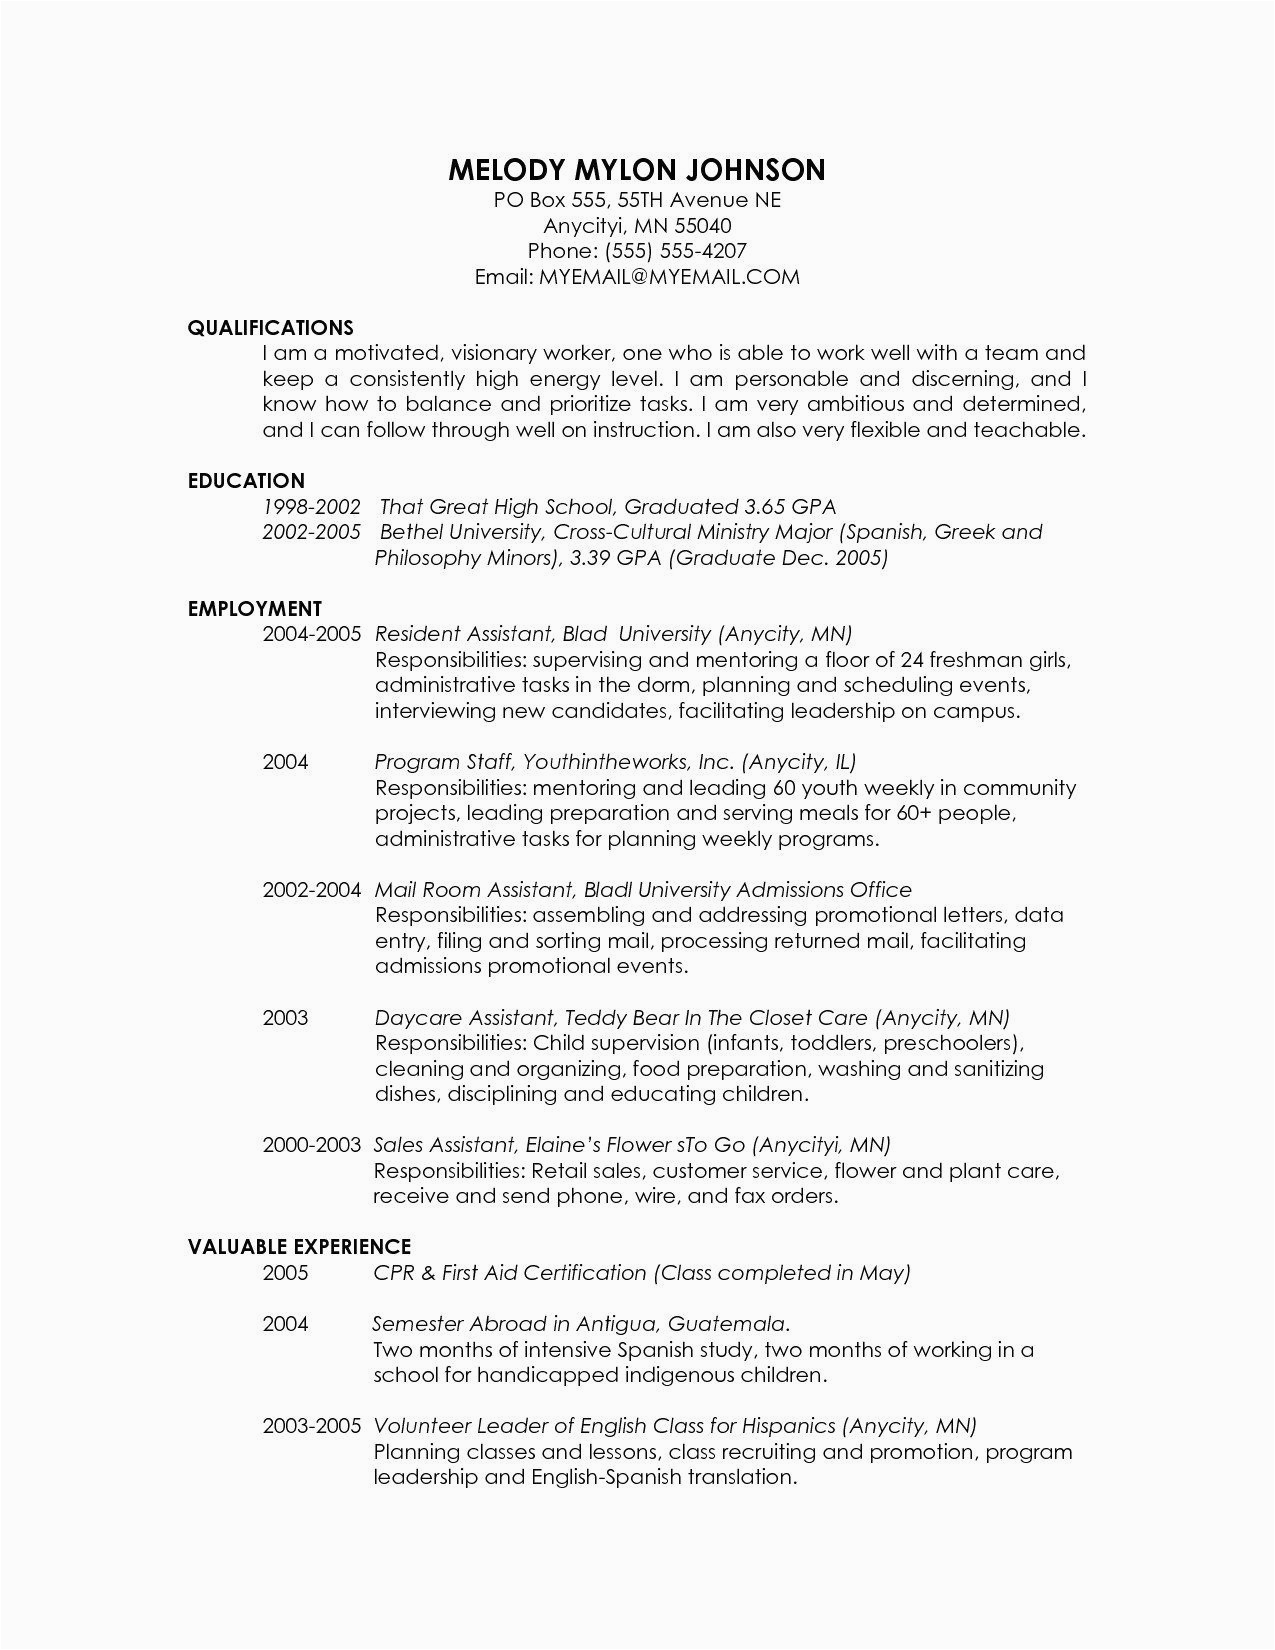 Resume Samples for Admission to Graduate School 23 Resume for Grad School Example In 2020 with Images